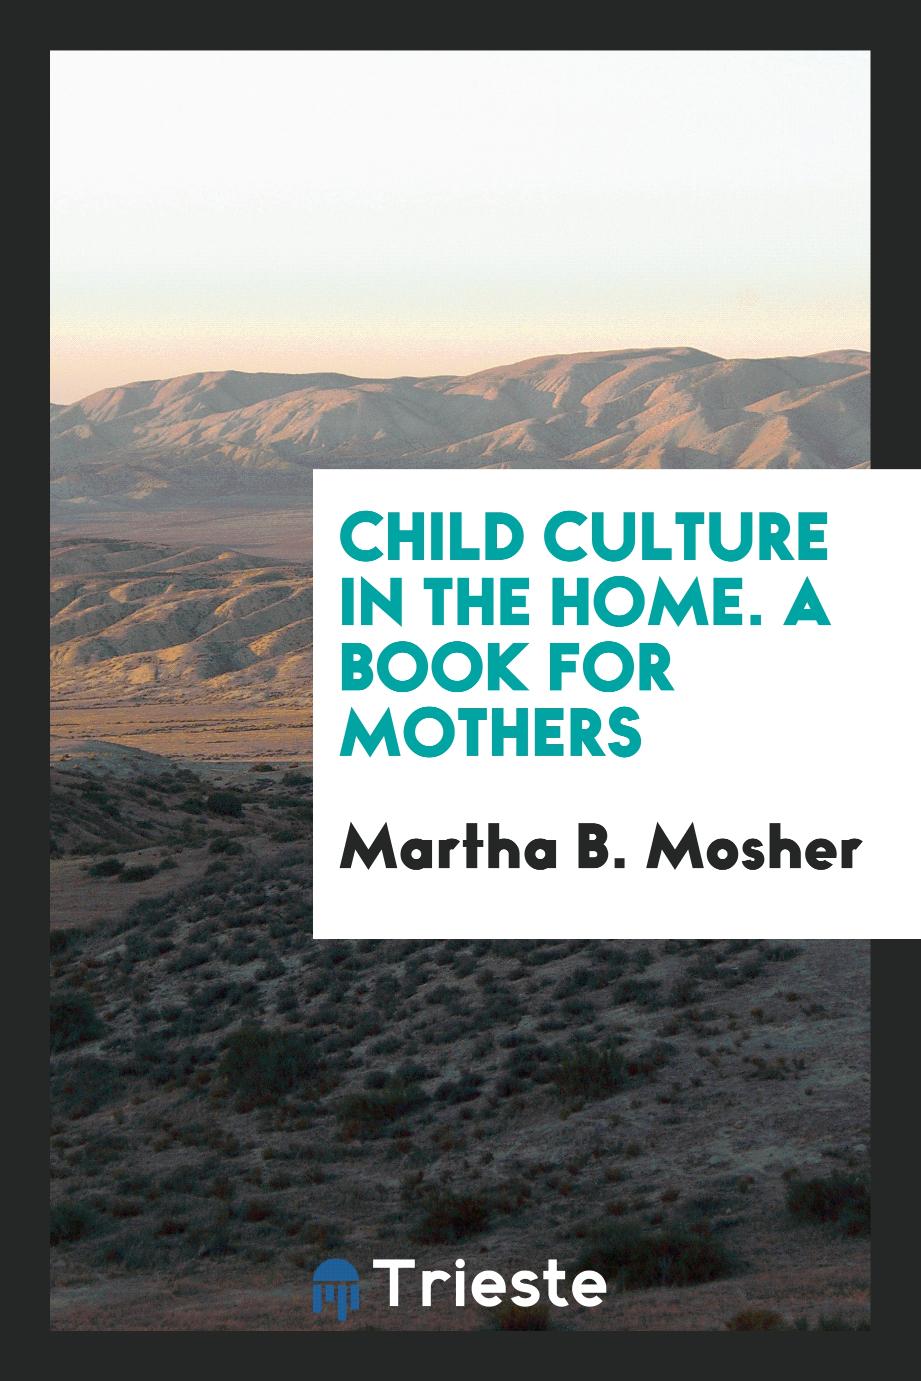 Child culture in the home. A book for mothers